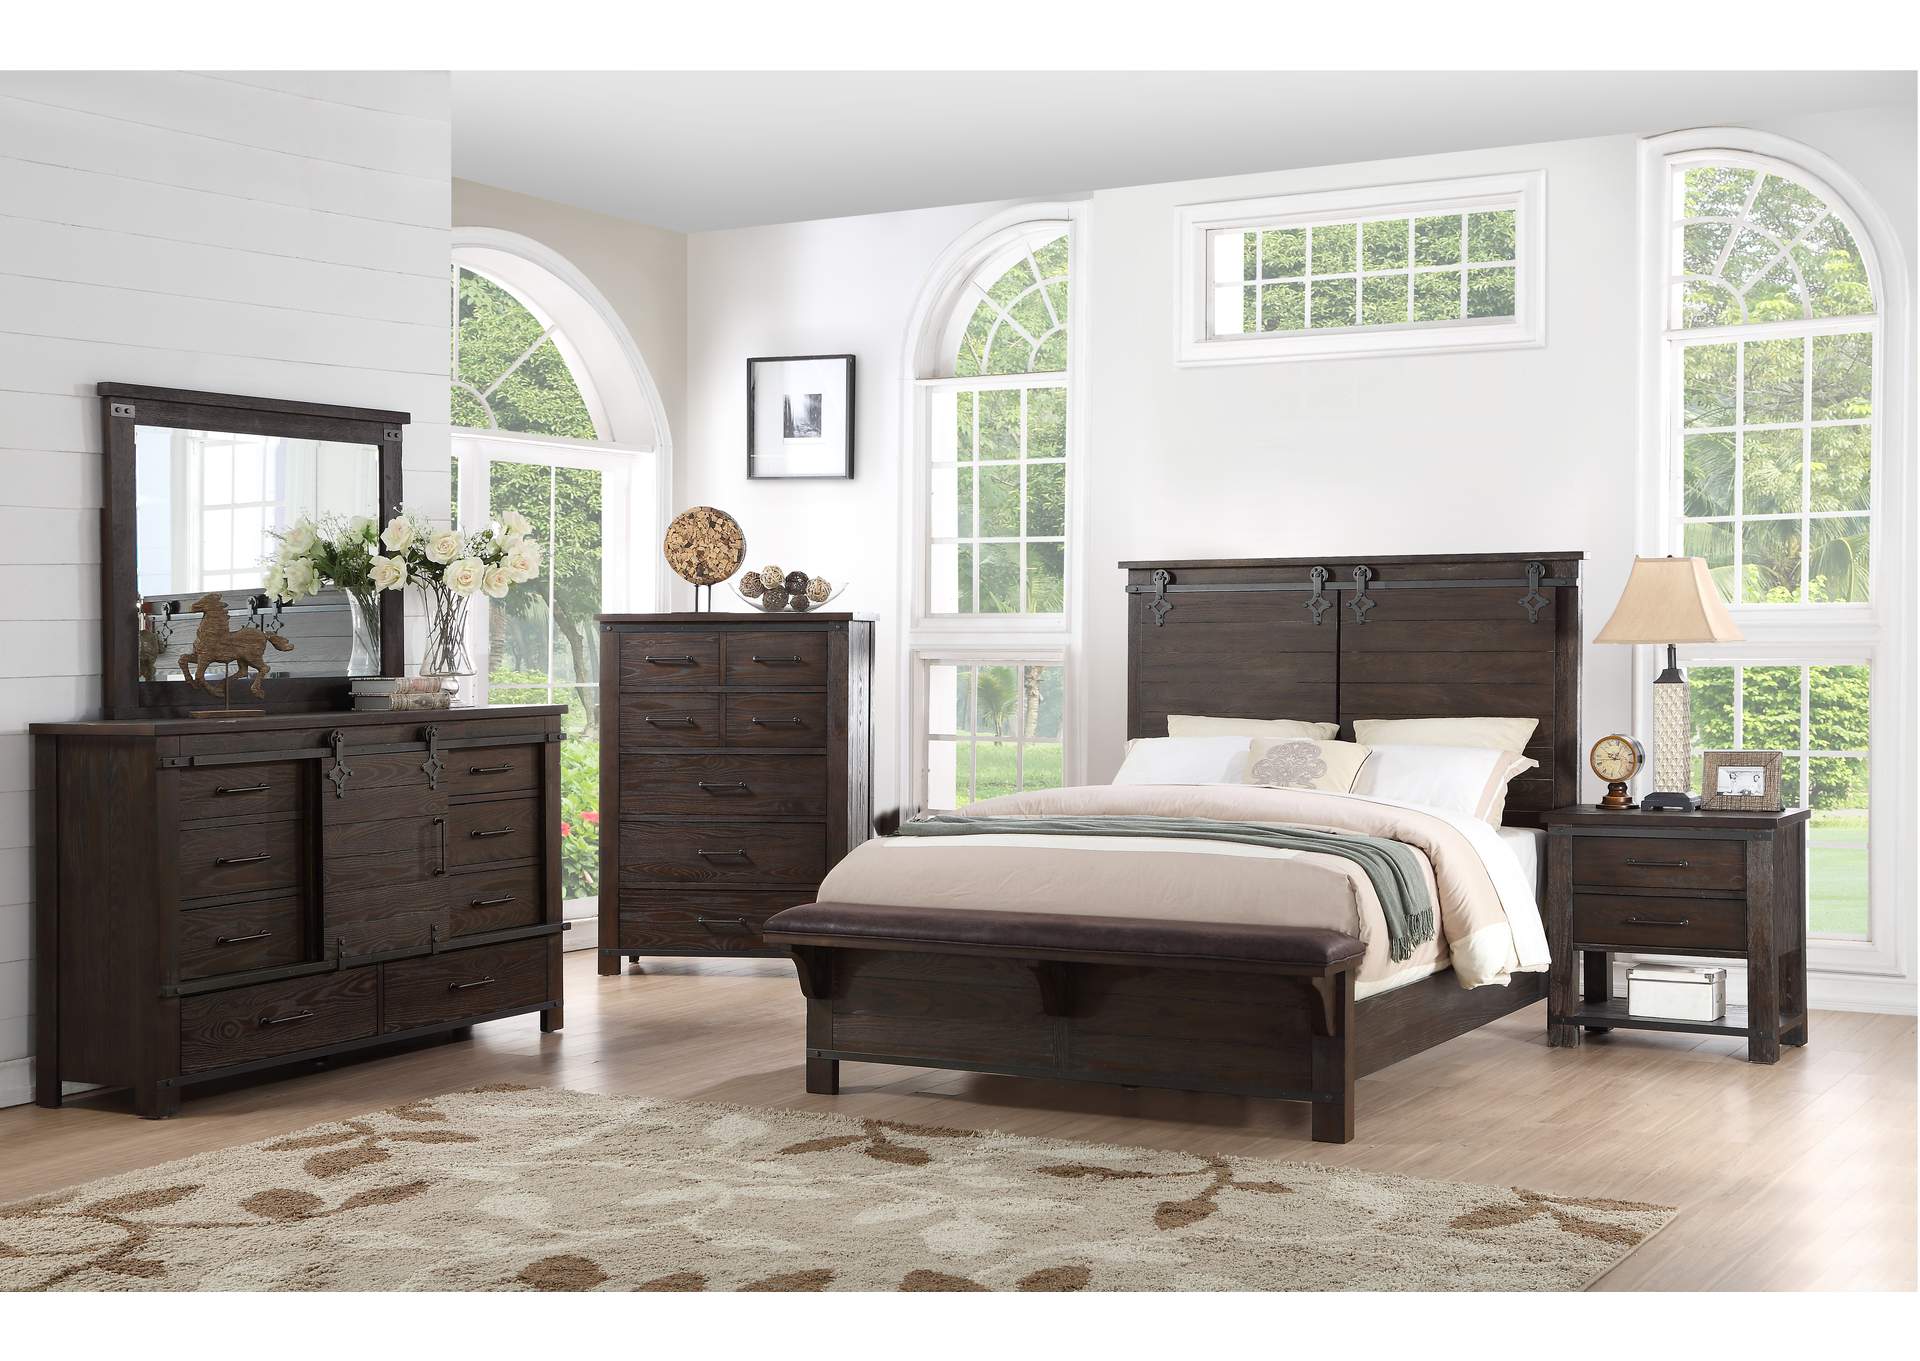 Newton Queen Bed,Emerald Home Furnishings